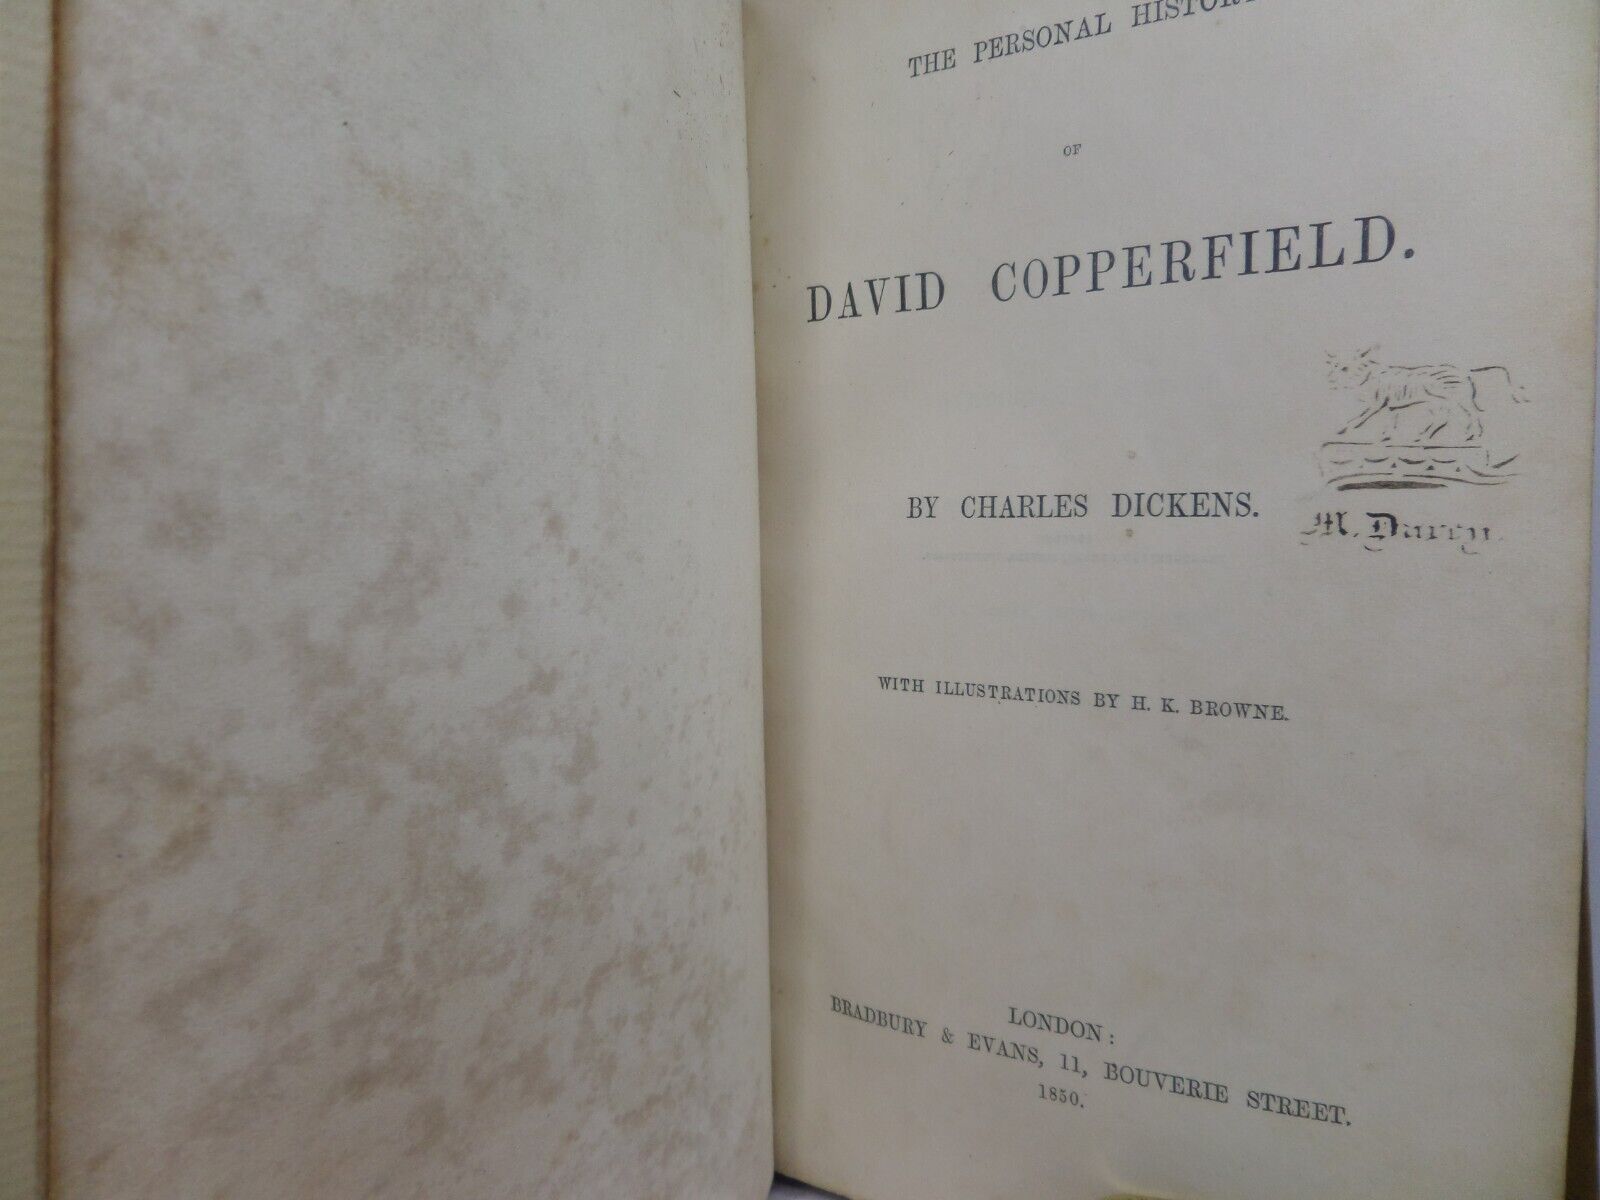 DAVID COPPERFIELD BY CHARLES DICKENS 1850 FIRST EDITION, FINE LEATHER BINDING